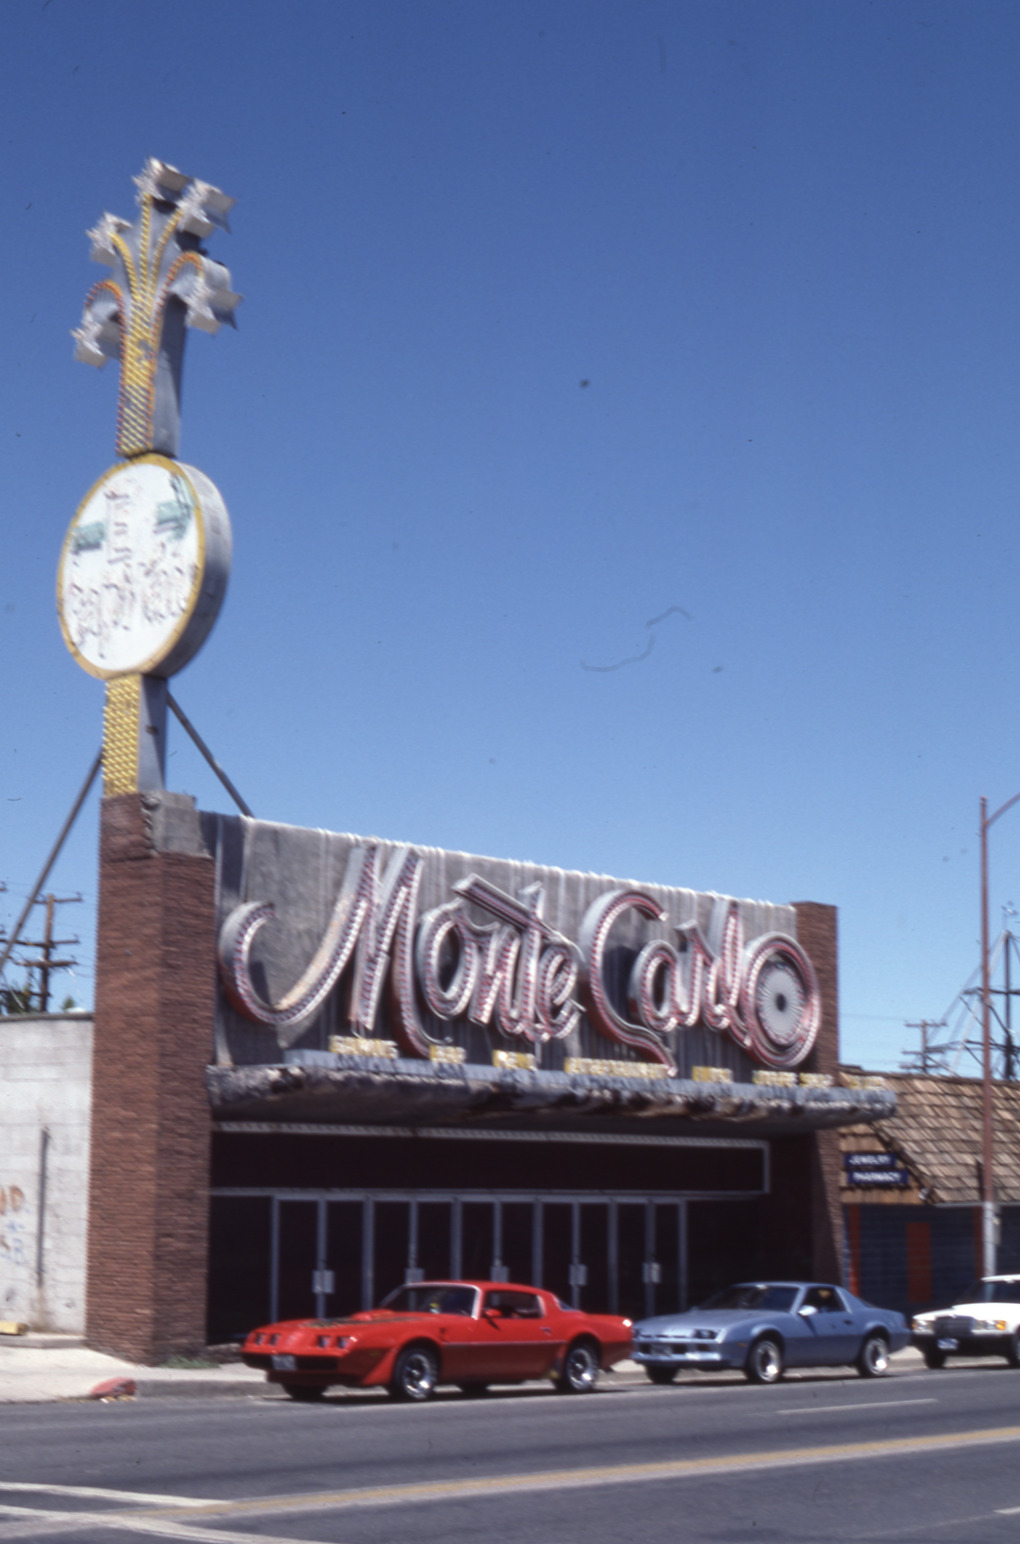 Monte Carlo Casino lettering and roof mounted sign, Hawthorne, Nevada: photographic print